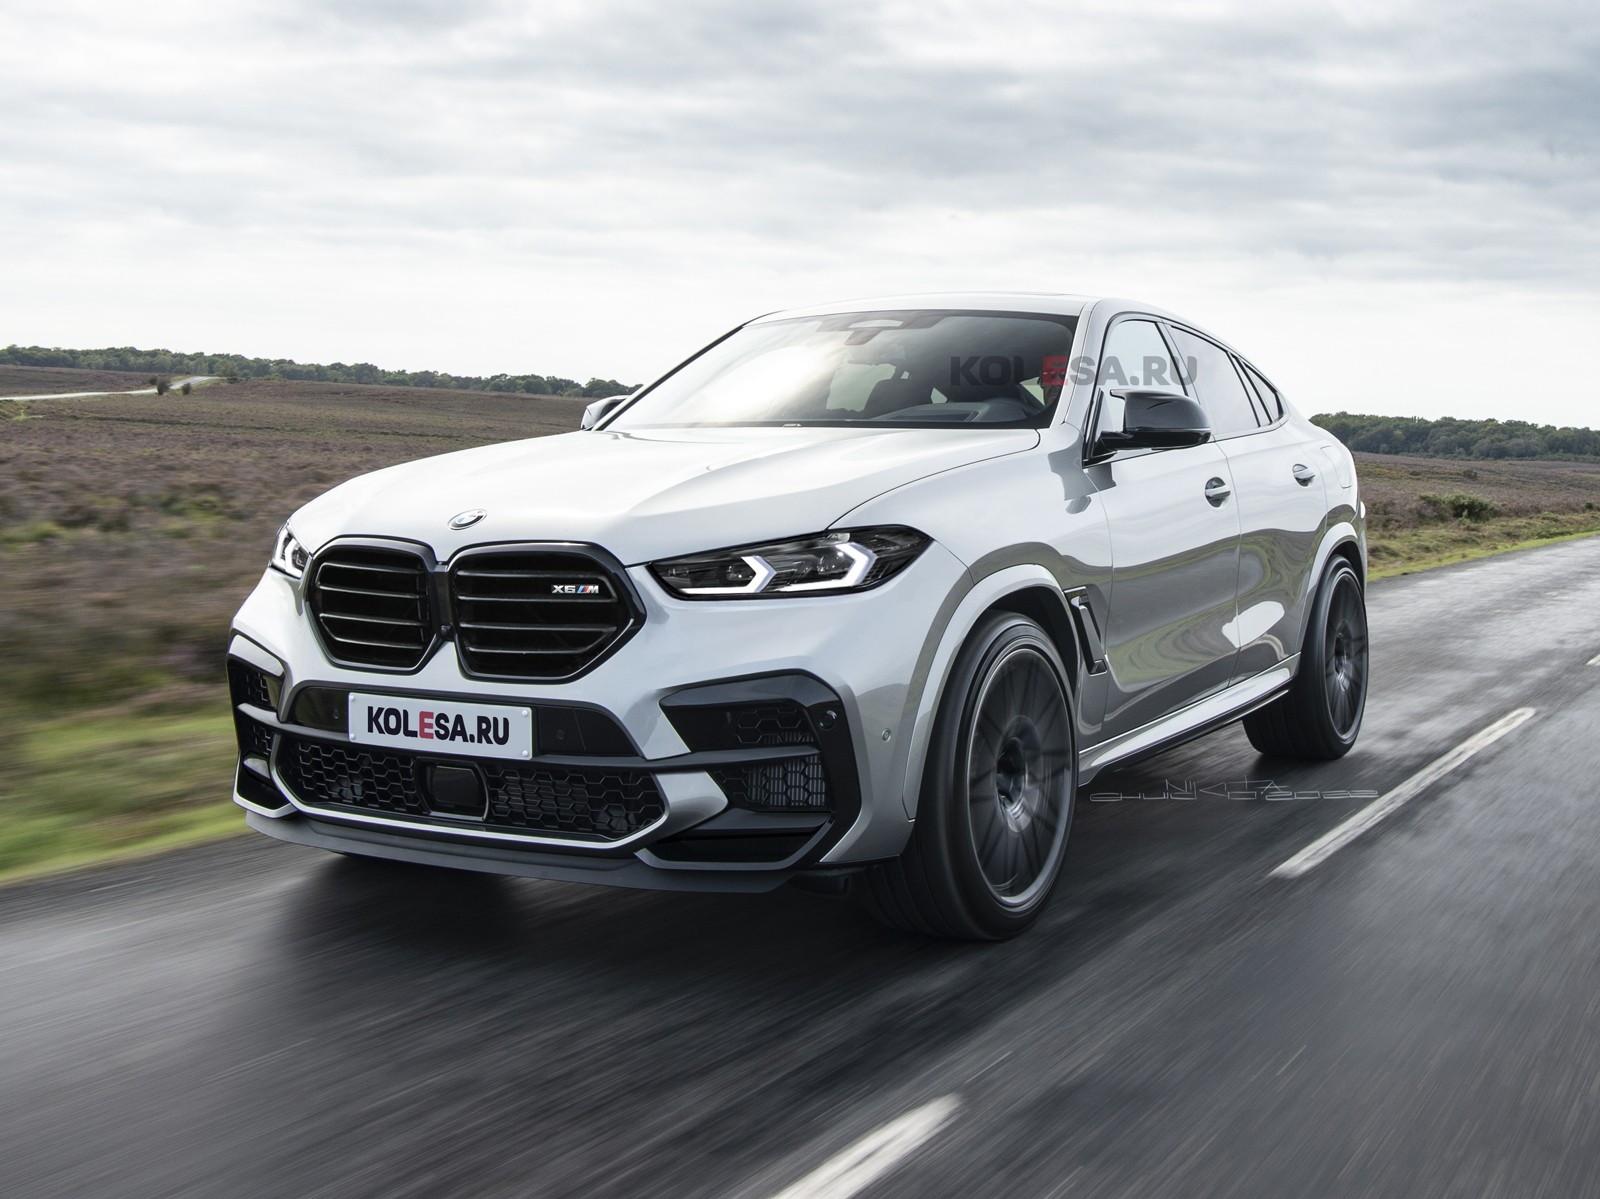 One SAC to Rule Them All BMW X6 M Imagined With Sharper